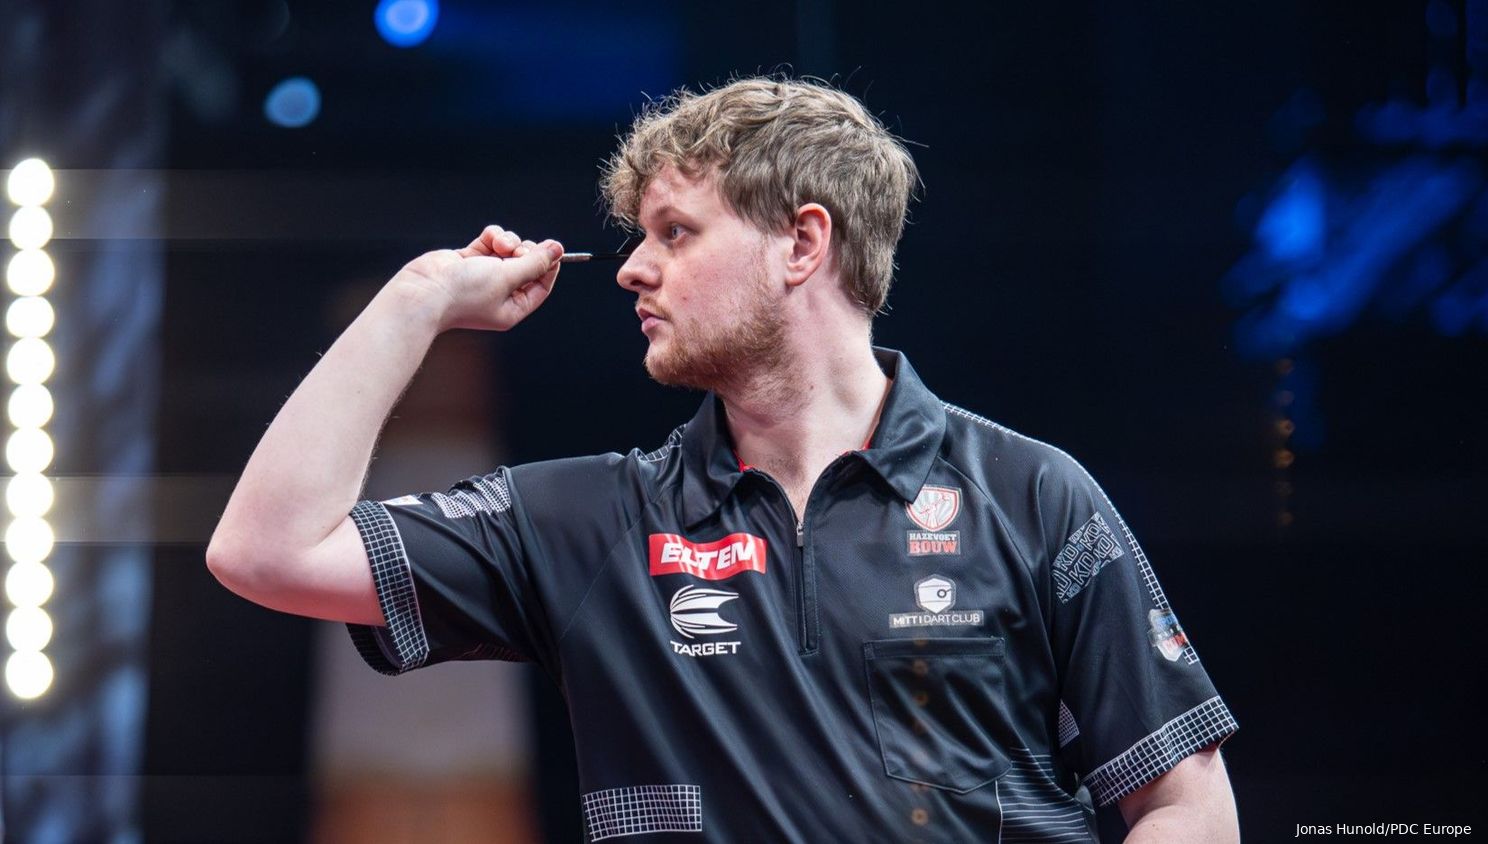 "I give myself five more years, otherwise it will be Sweden" - Kevin Doets has back up plan for World Cup of Darts appearance